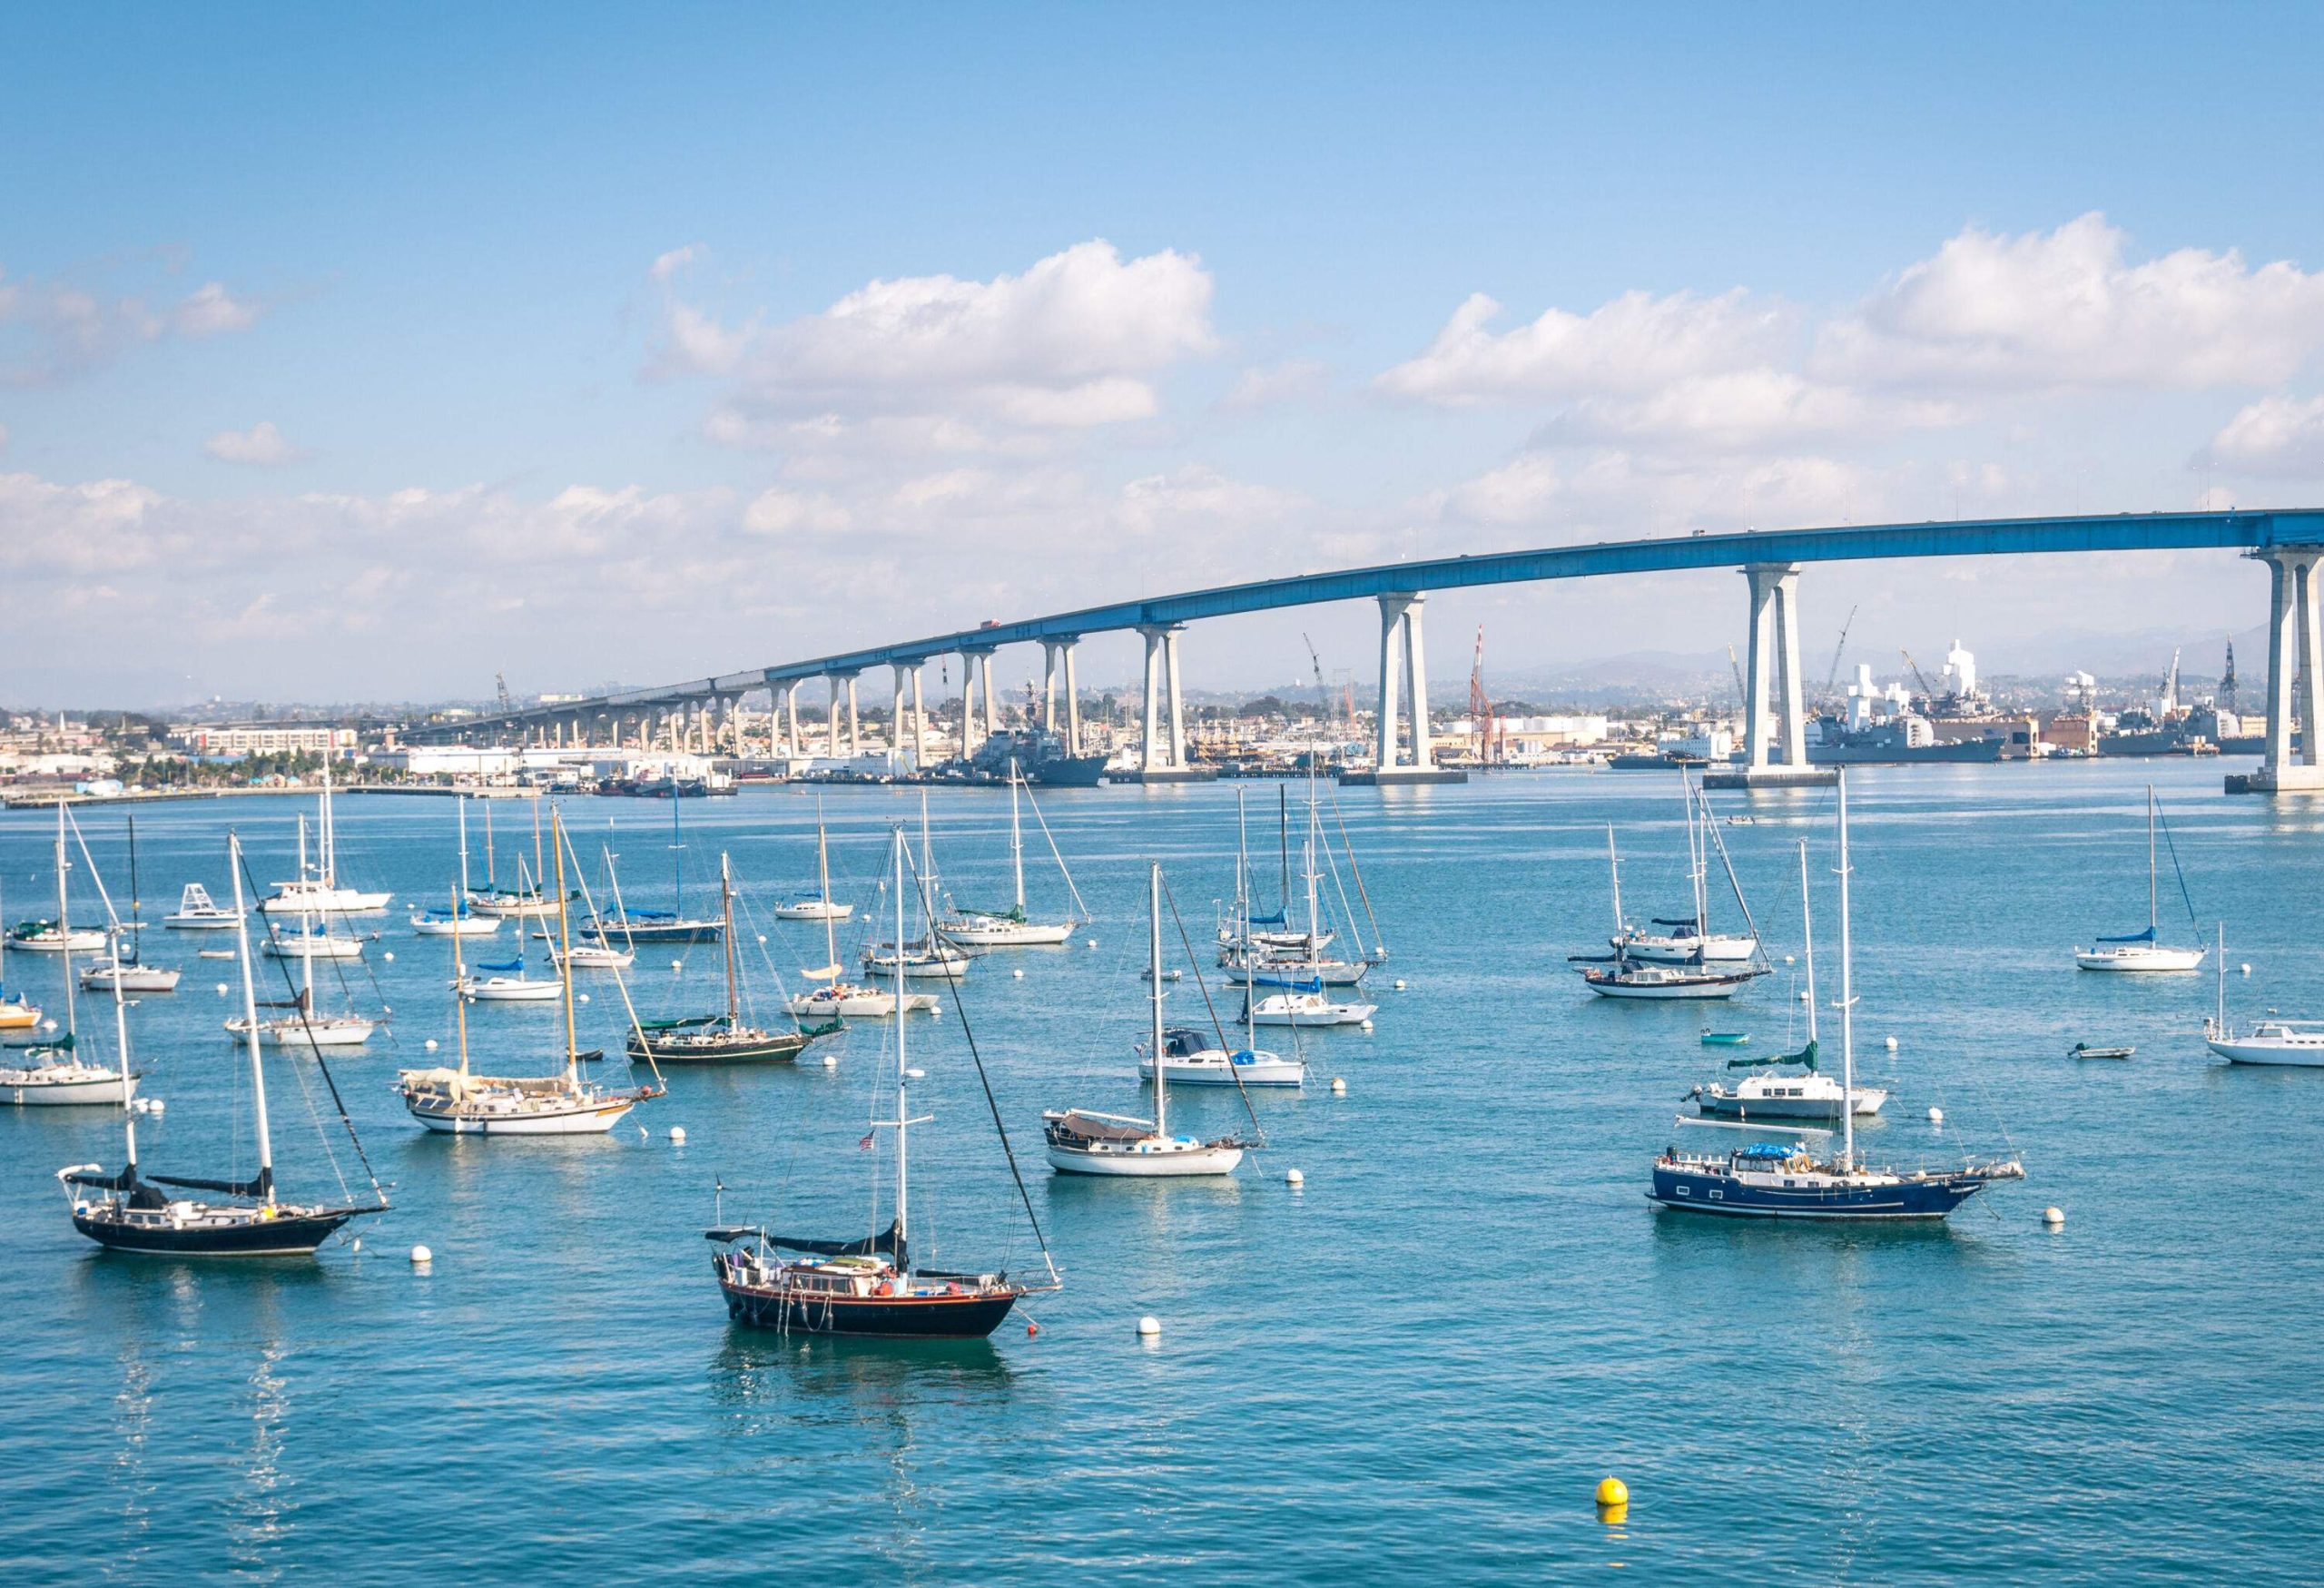 A series of sailboats floating on a harbour with views of an elevated road bridge across a calm bay.